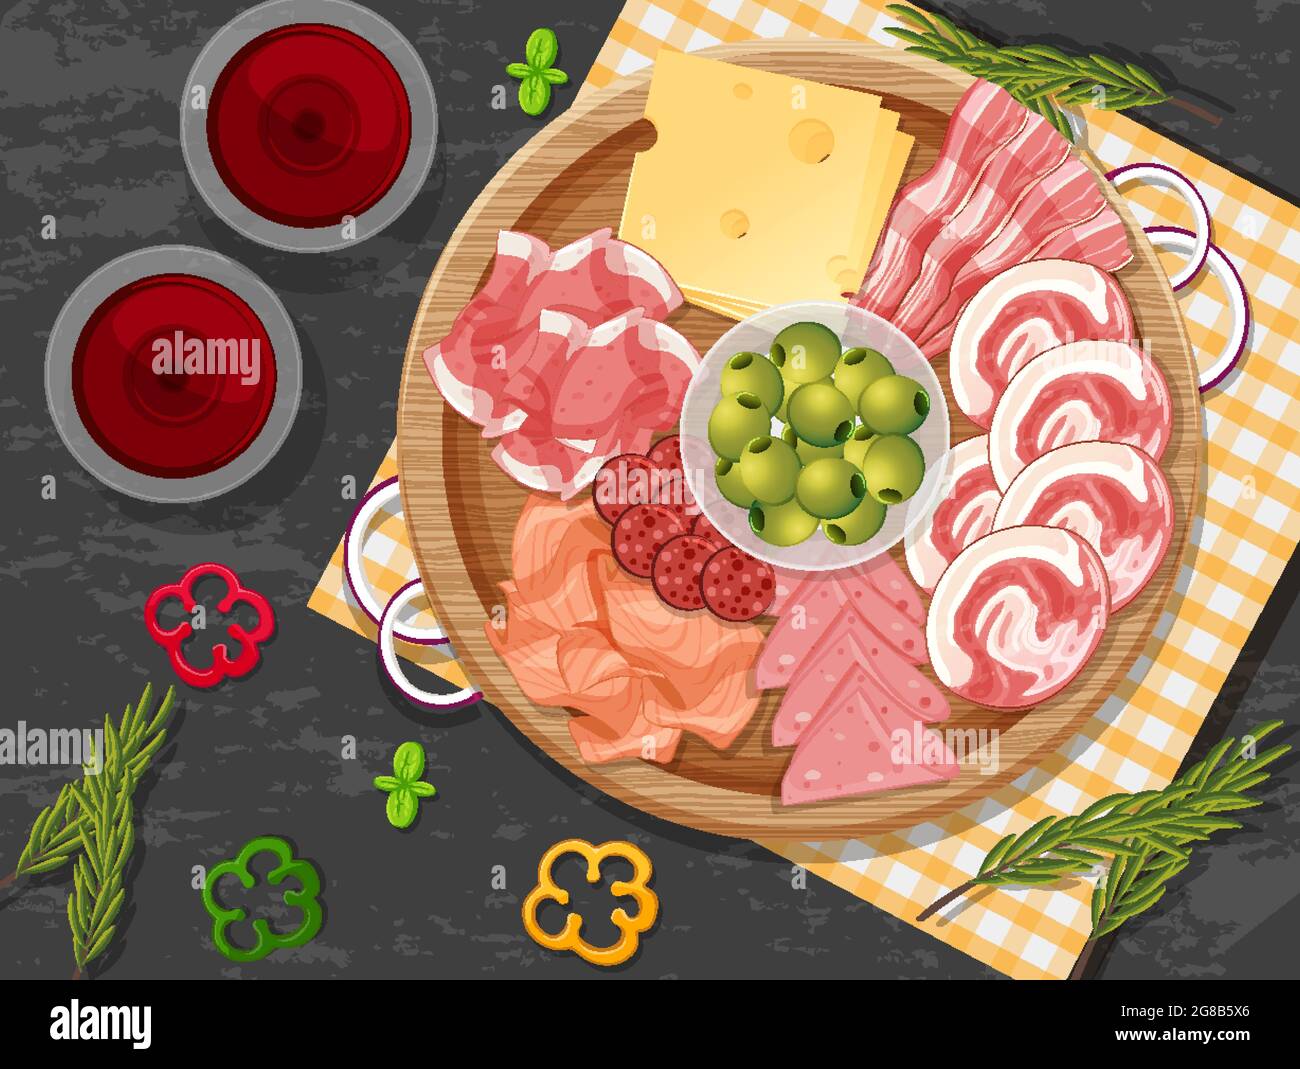 Platter of cold cuts and smoked meat on the table background illustration Stock Vector